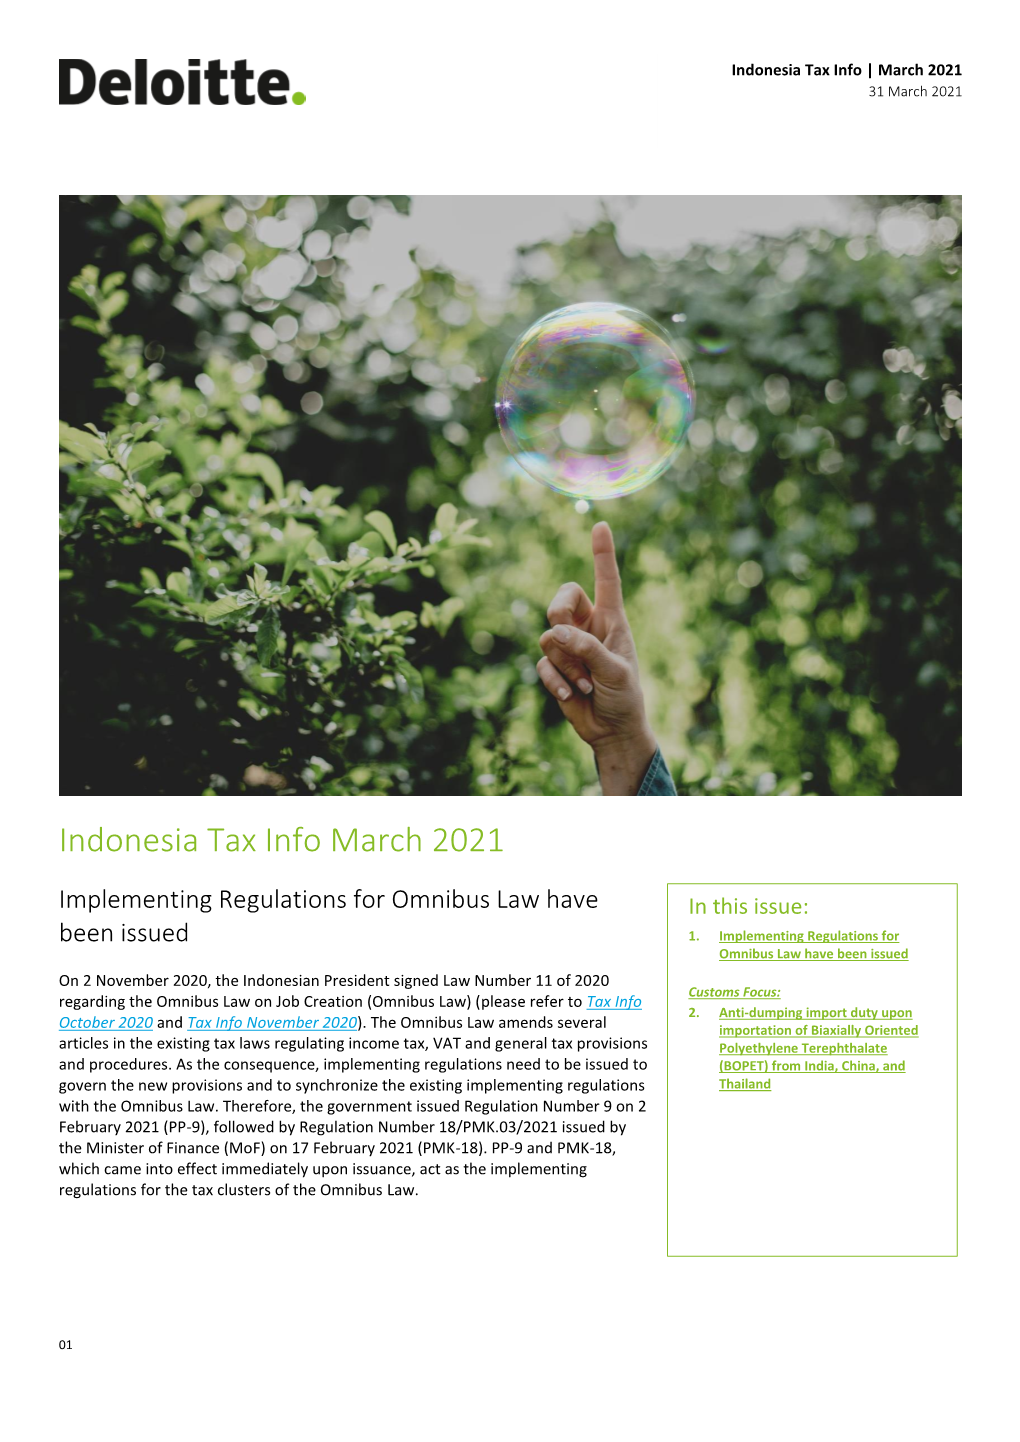 Indonesia Tax Info March 2021